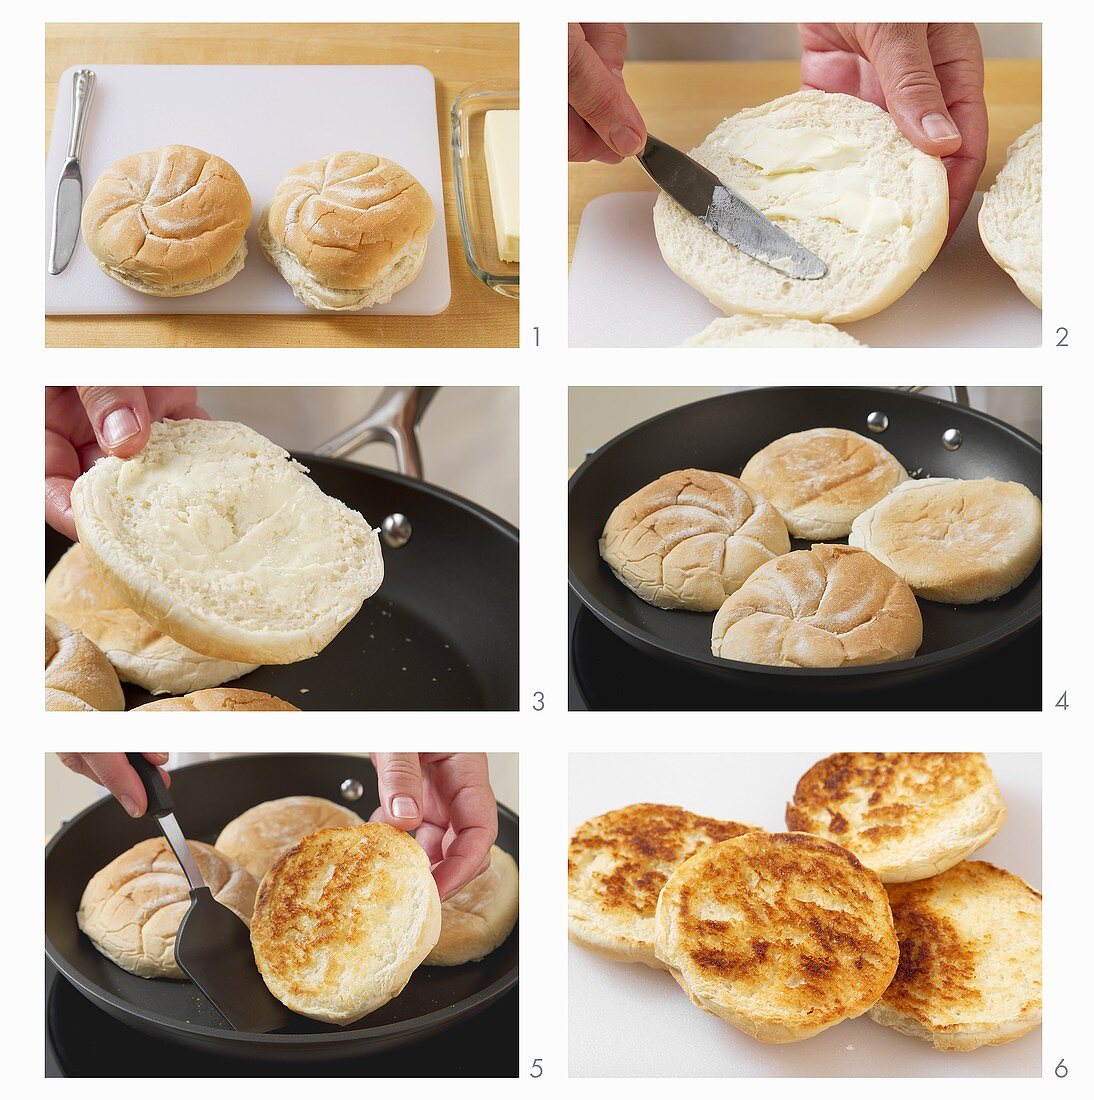 Bread rolls being spread with butter and toasted in a pan